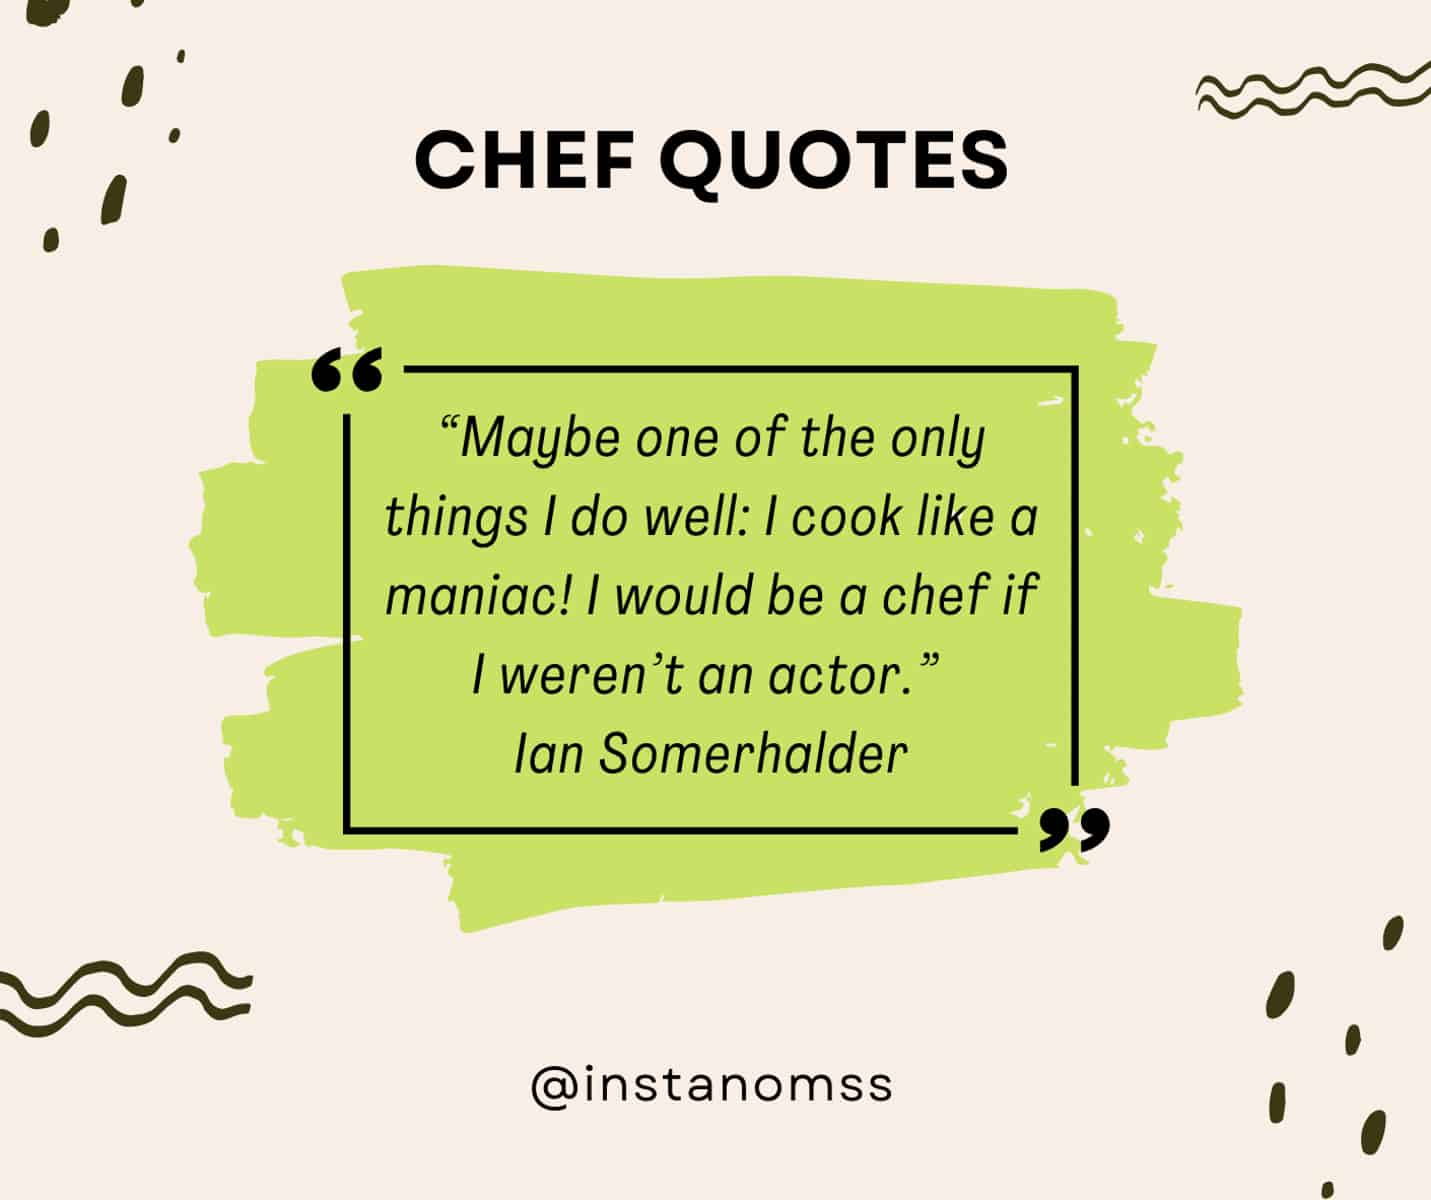 “Maybe one of the only things I do well: I cook like a maniac! I would be a chef if I weren’t an actor.” Ian Somerhalder